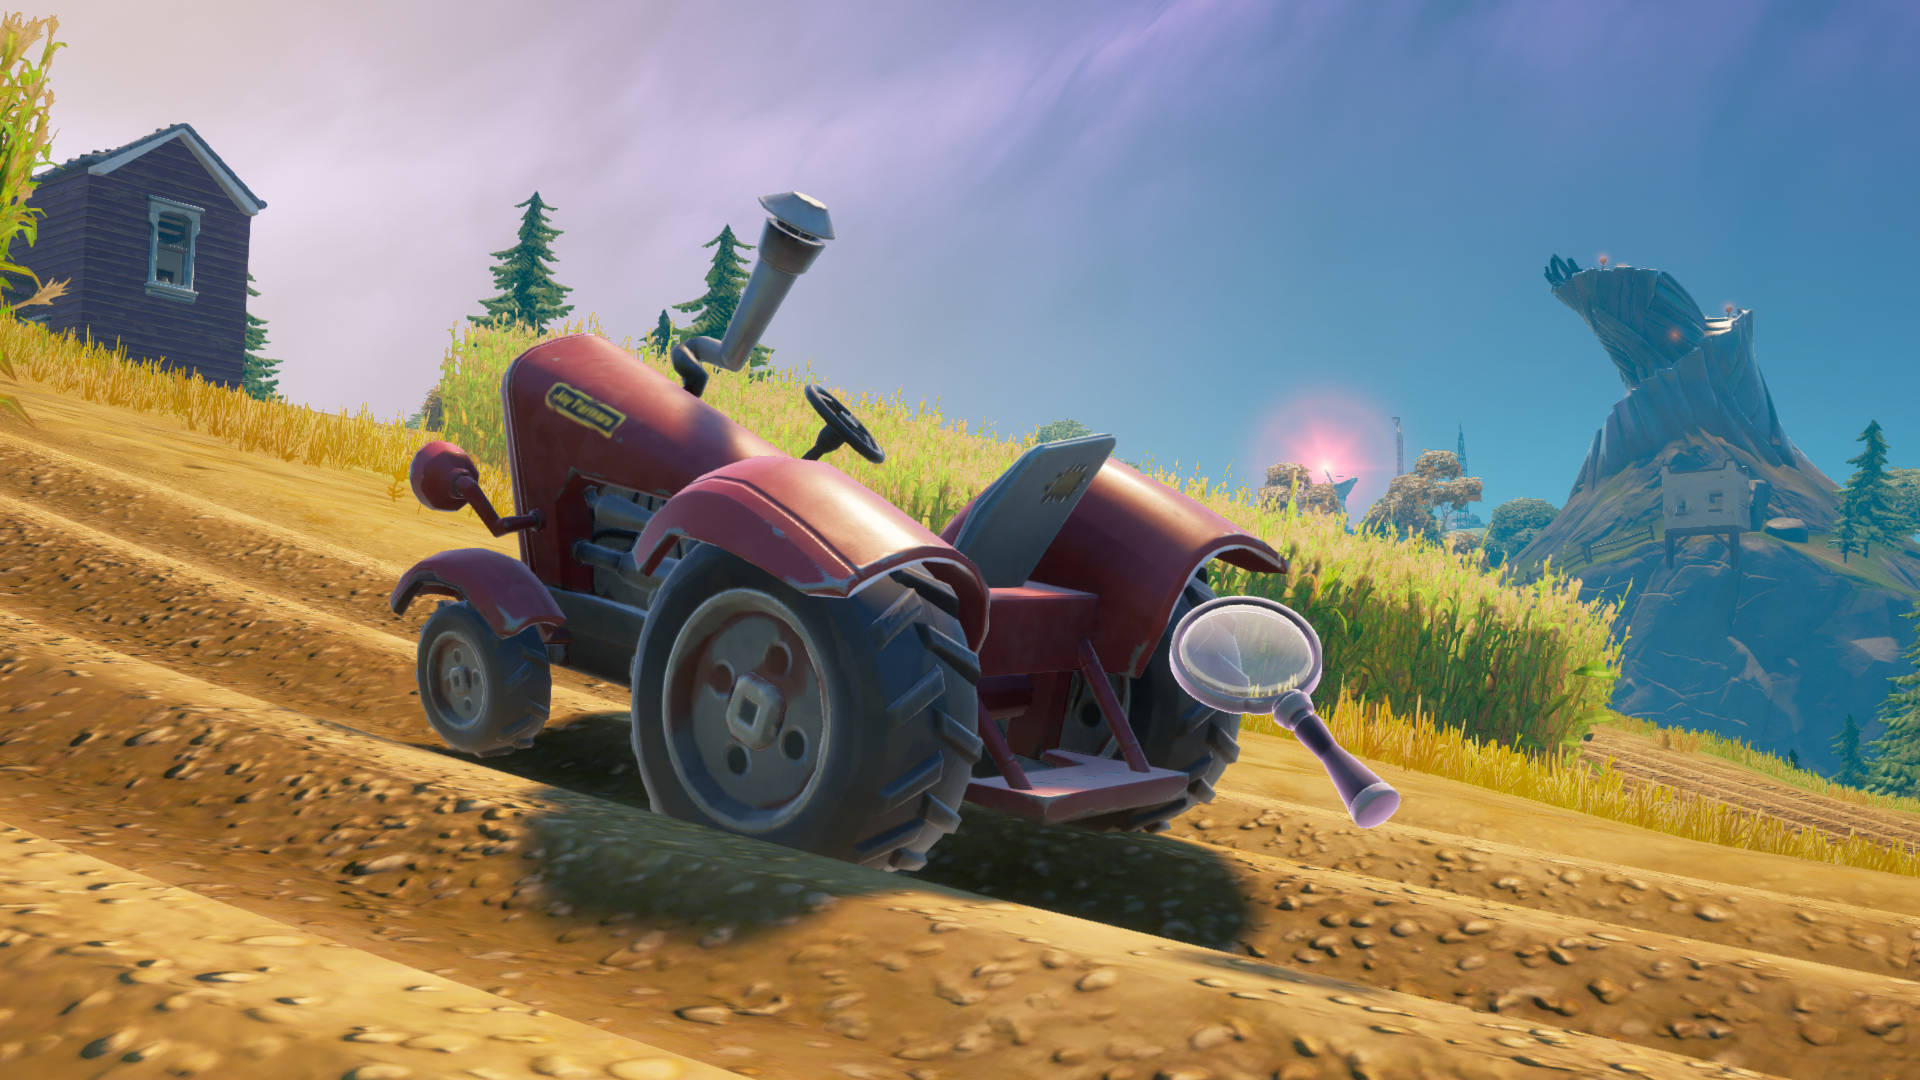 Where to search the farm for clues in Fortnite